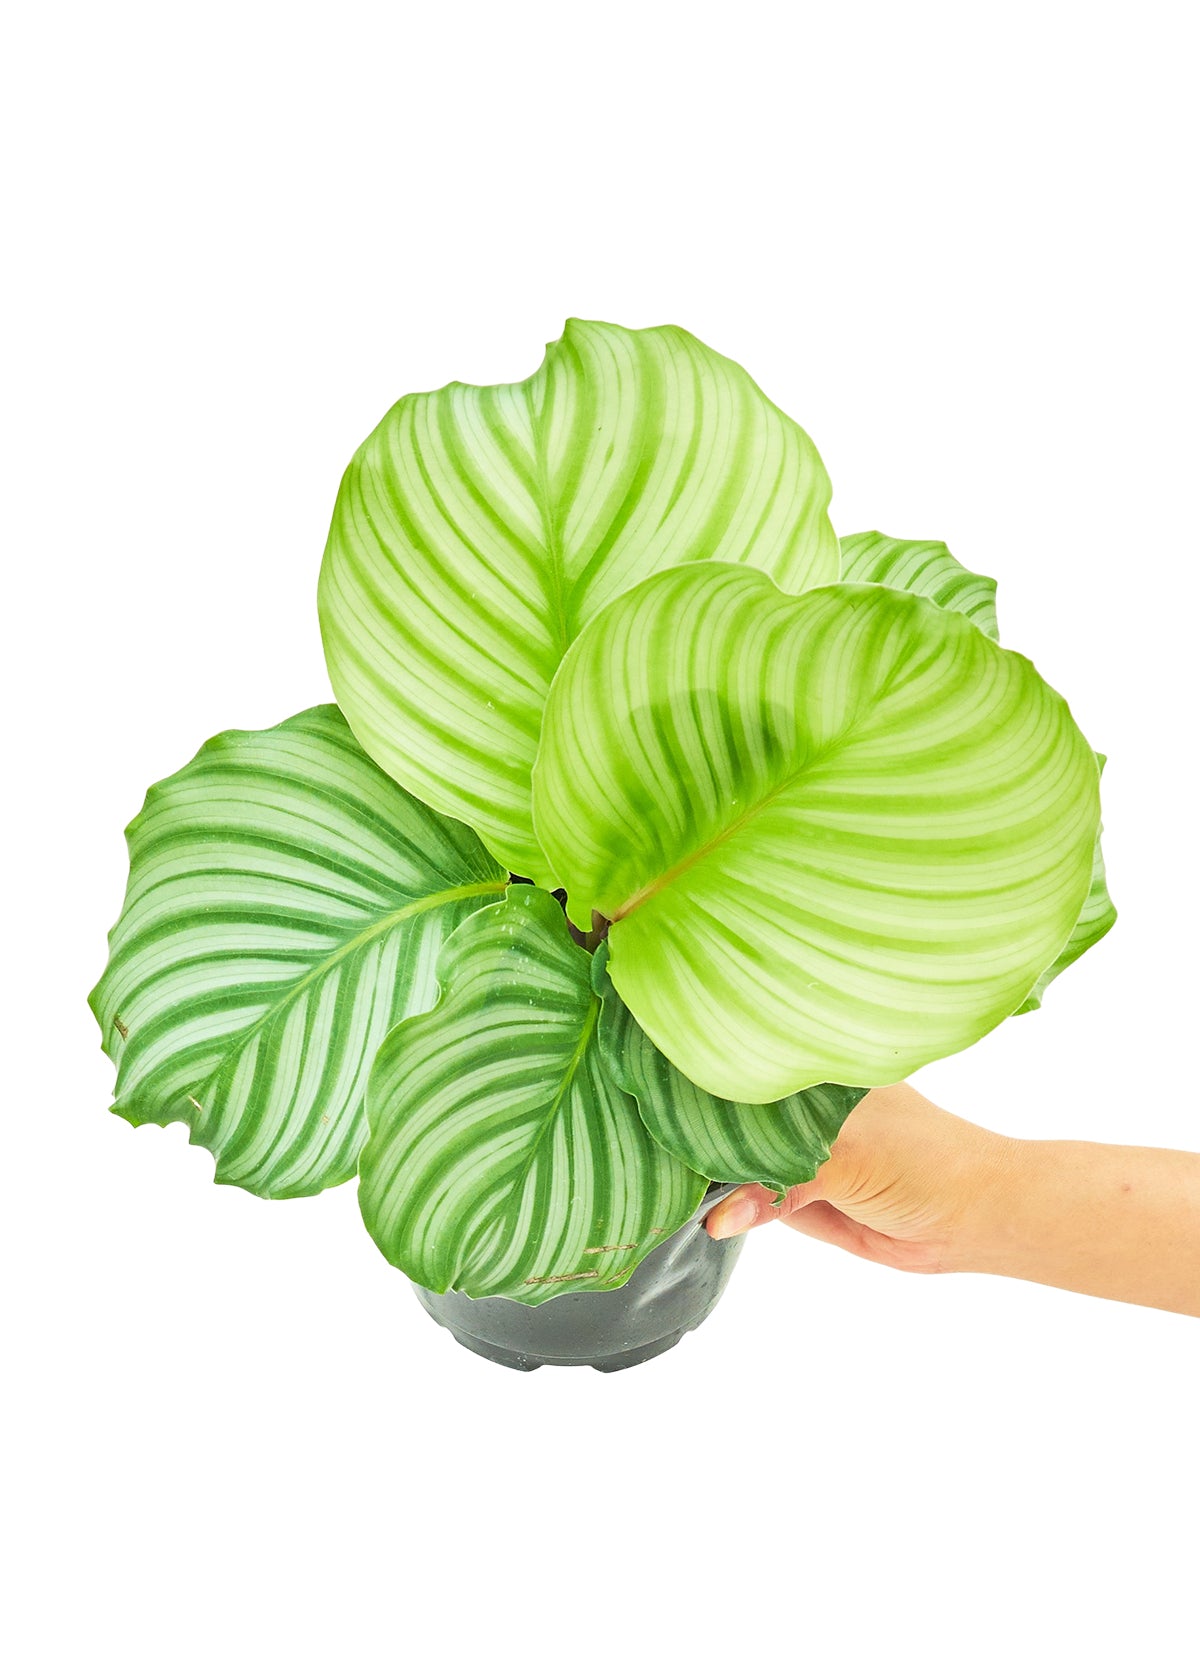 Medium size Orbit Peacock Plant in a growers pot with a white background with a hand holding the plant showing the top view